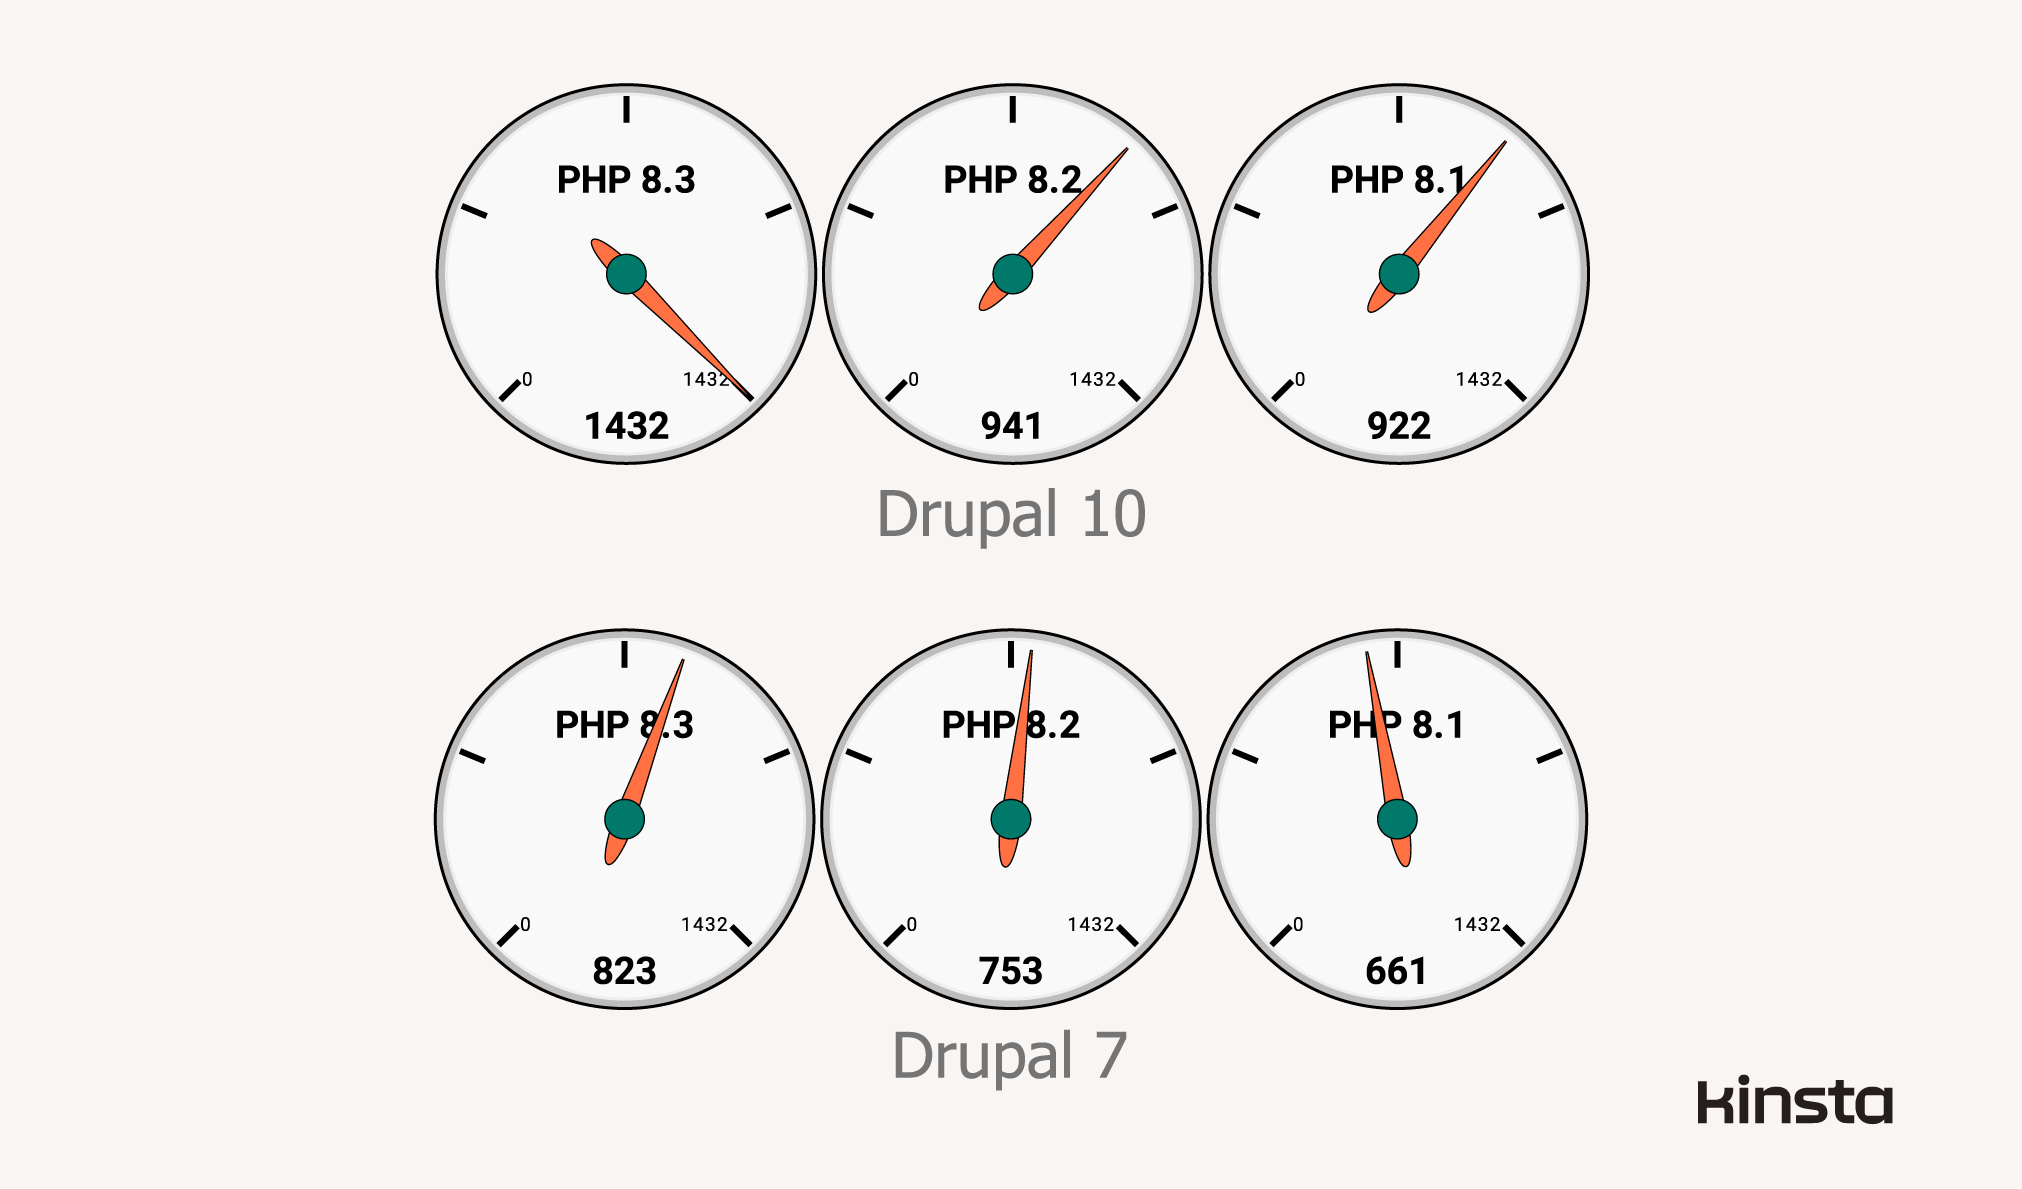 Drupal 7.98 and Drupal 10.1.1 performance on PHP 8.1, 8.2, and 8.3 (in requests/second).